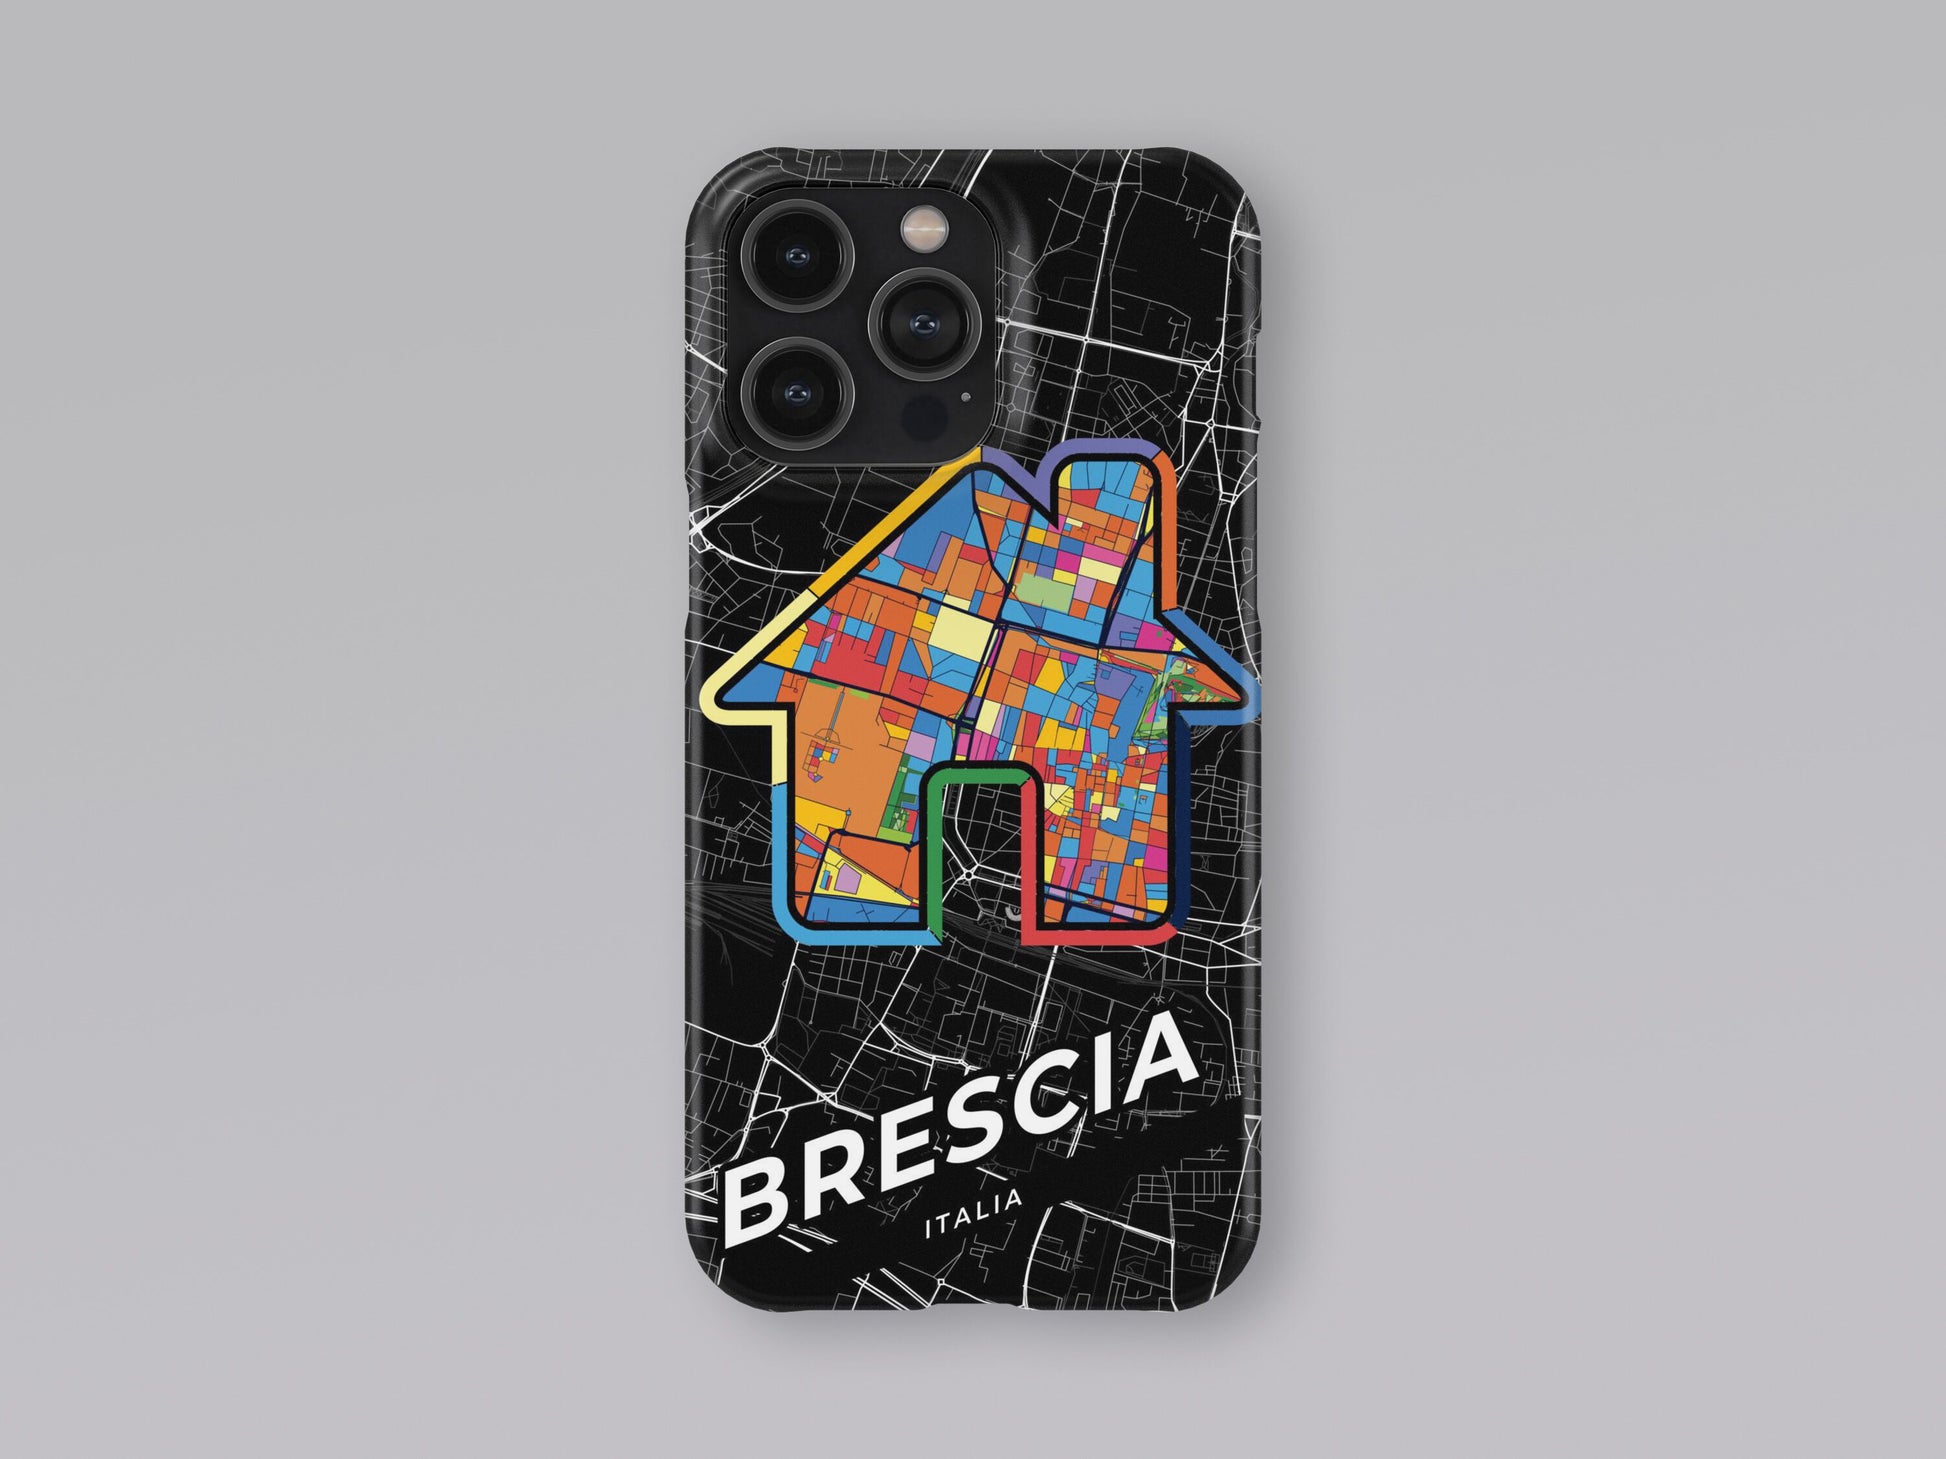 Brescia Italy slim phone case with colorful icon. Birthday, wedding or housewarming gift. Couple match cases. 3